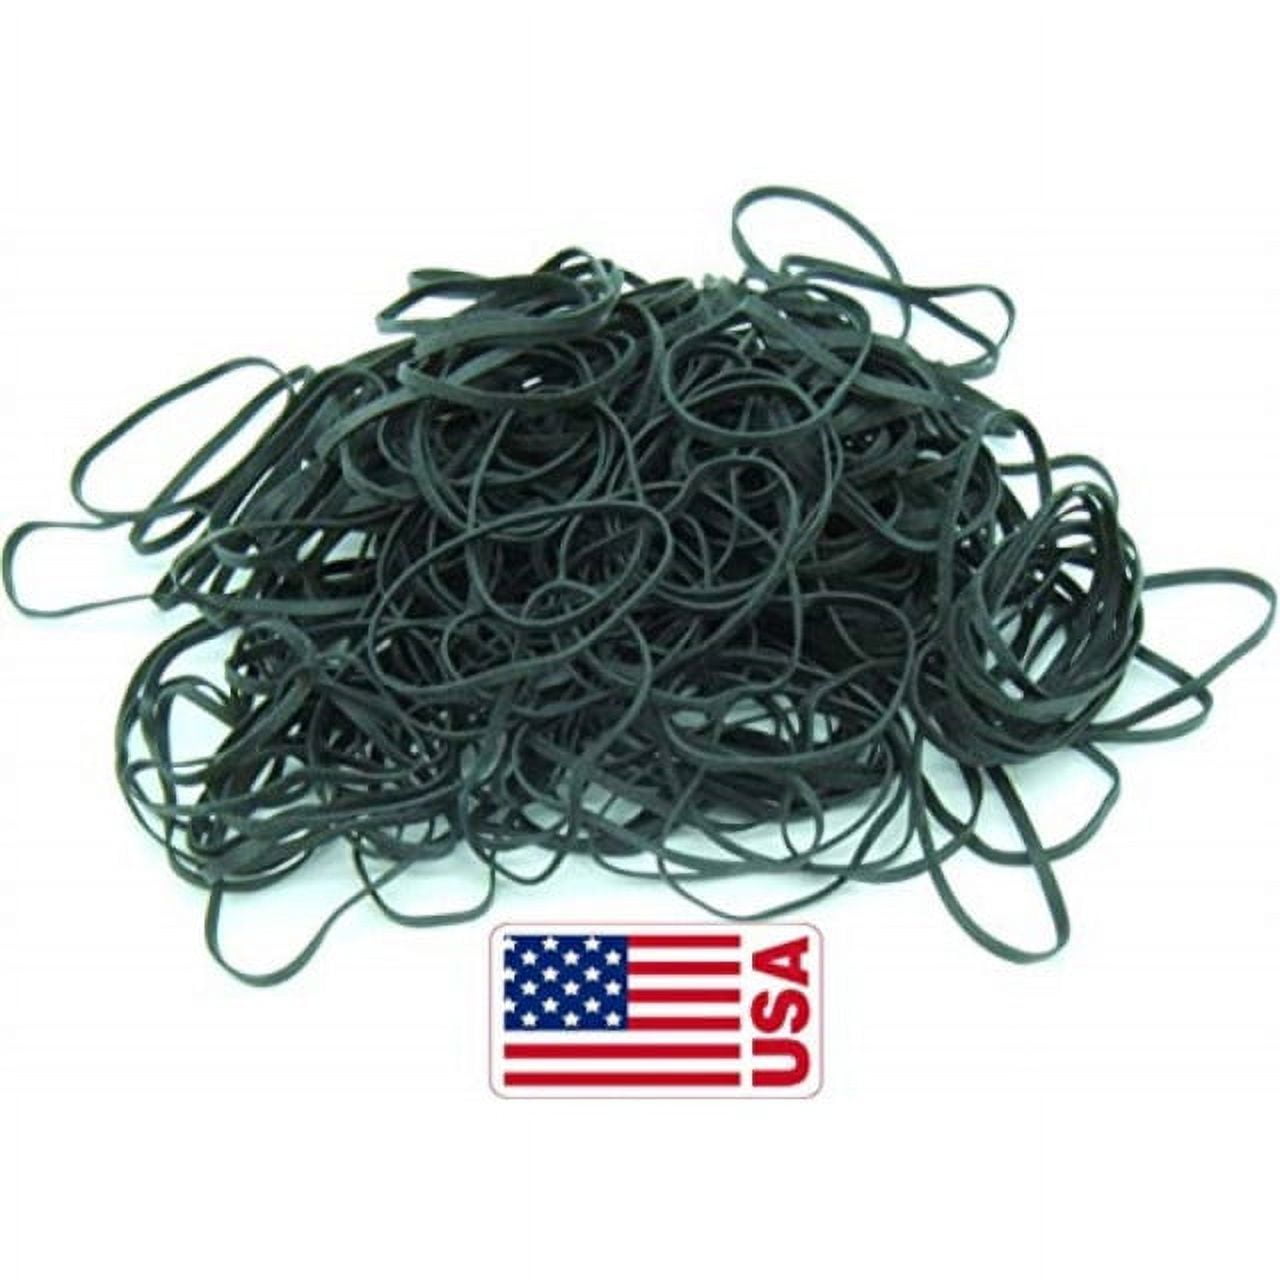 Crafted-Brand 20 Heavy Duty Rubber Bands | Big Thick XL-Large UV Resistant Black Rubber-Bands for Fishing, RC, or Hair + Use What The Pros Use + 1